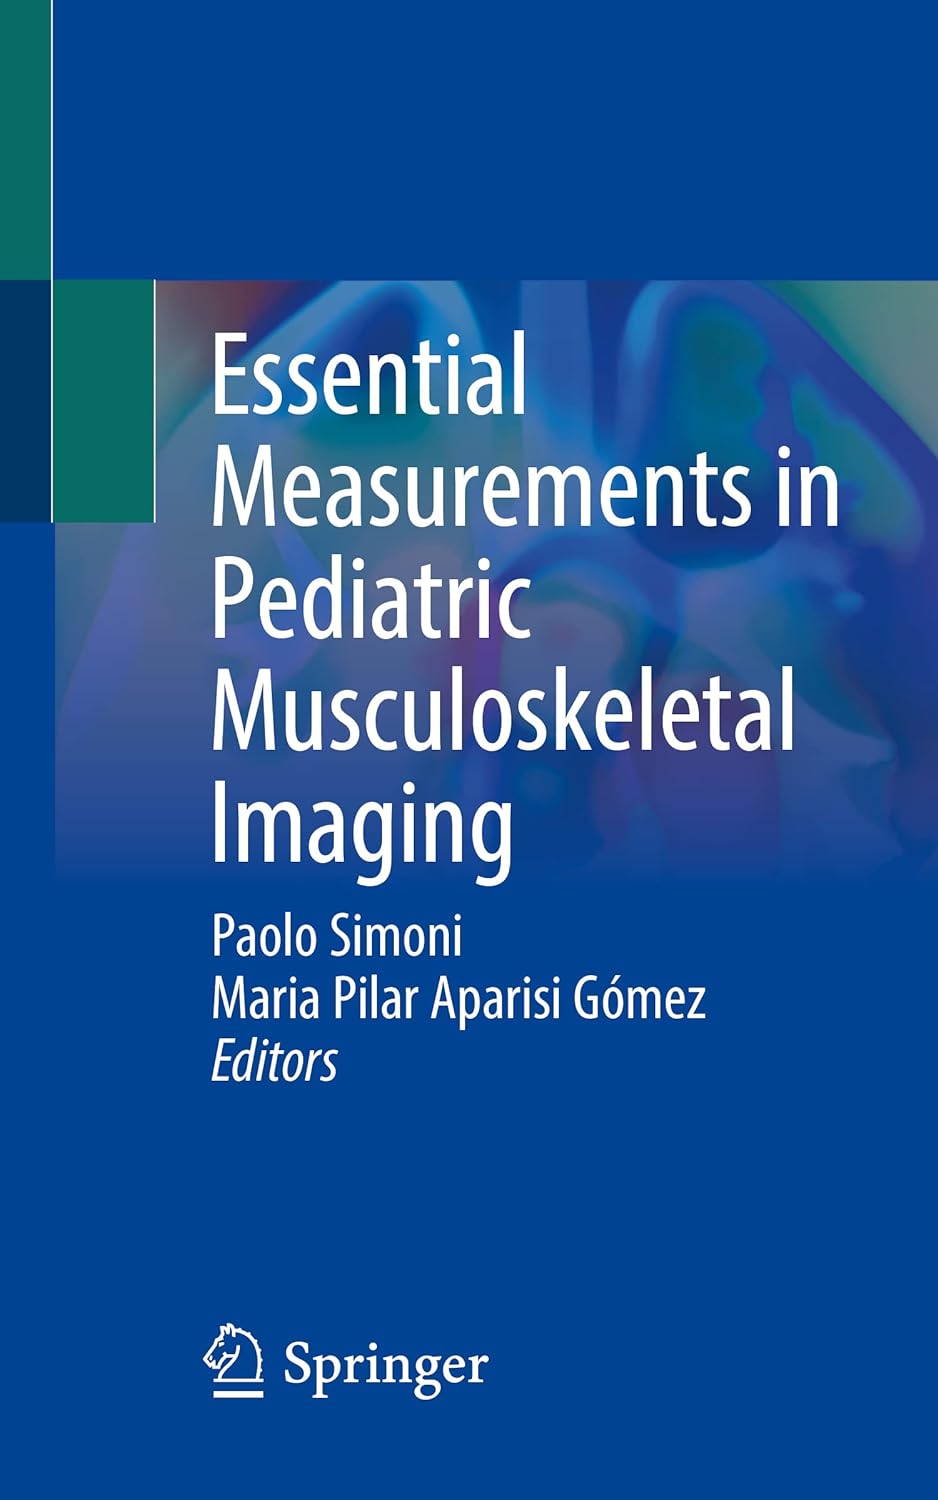 Essential Measurements in Pediatric Musculoskeletal Imaging  by Paolo Simoni 